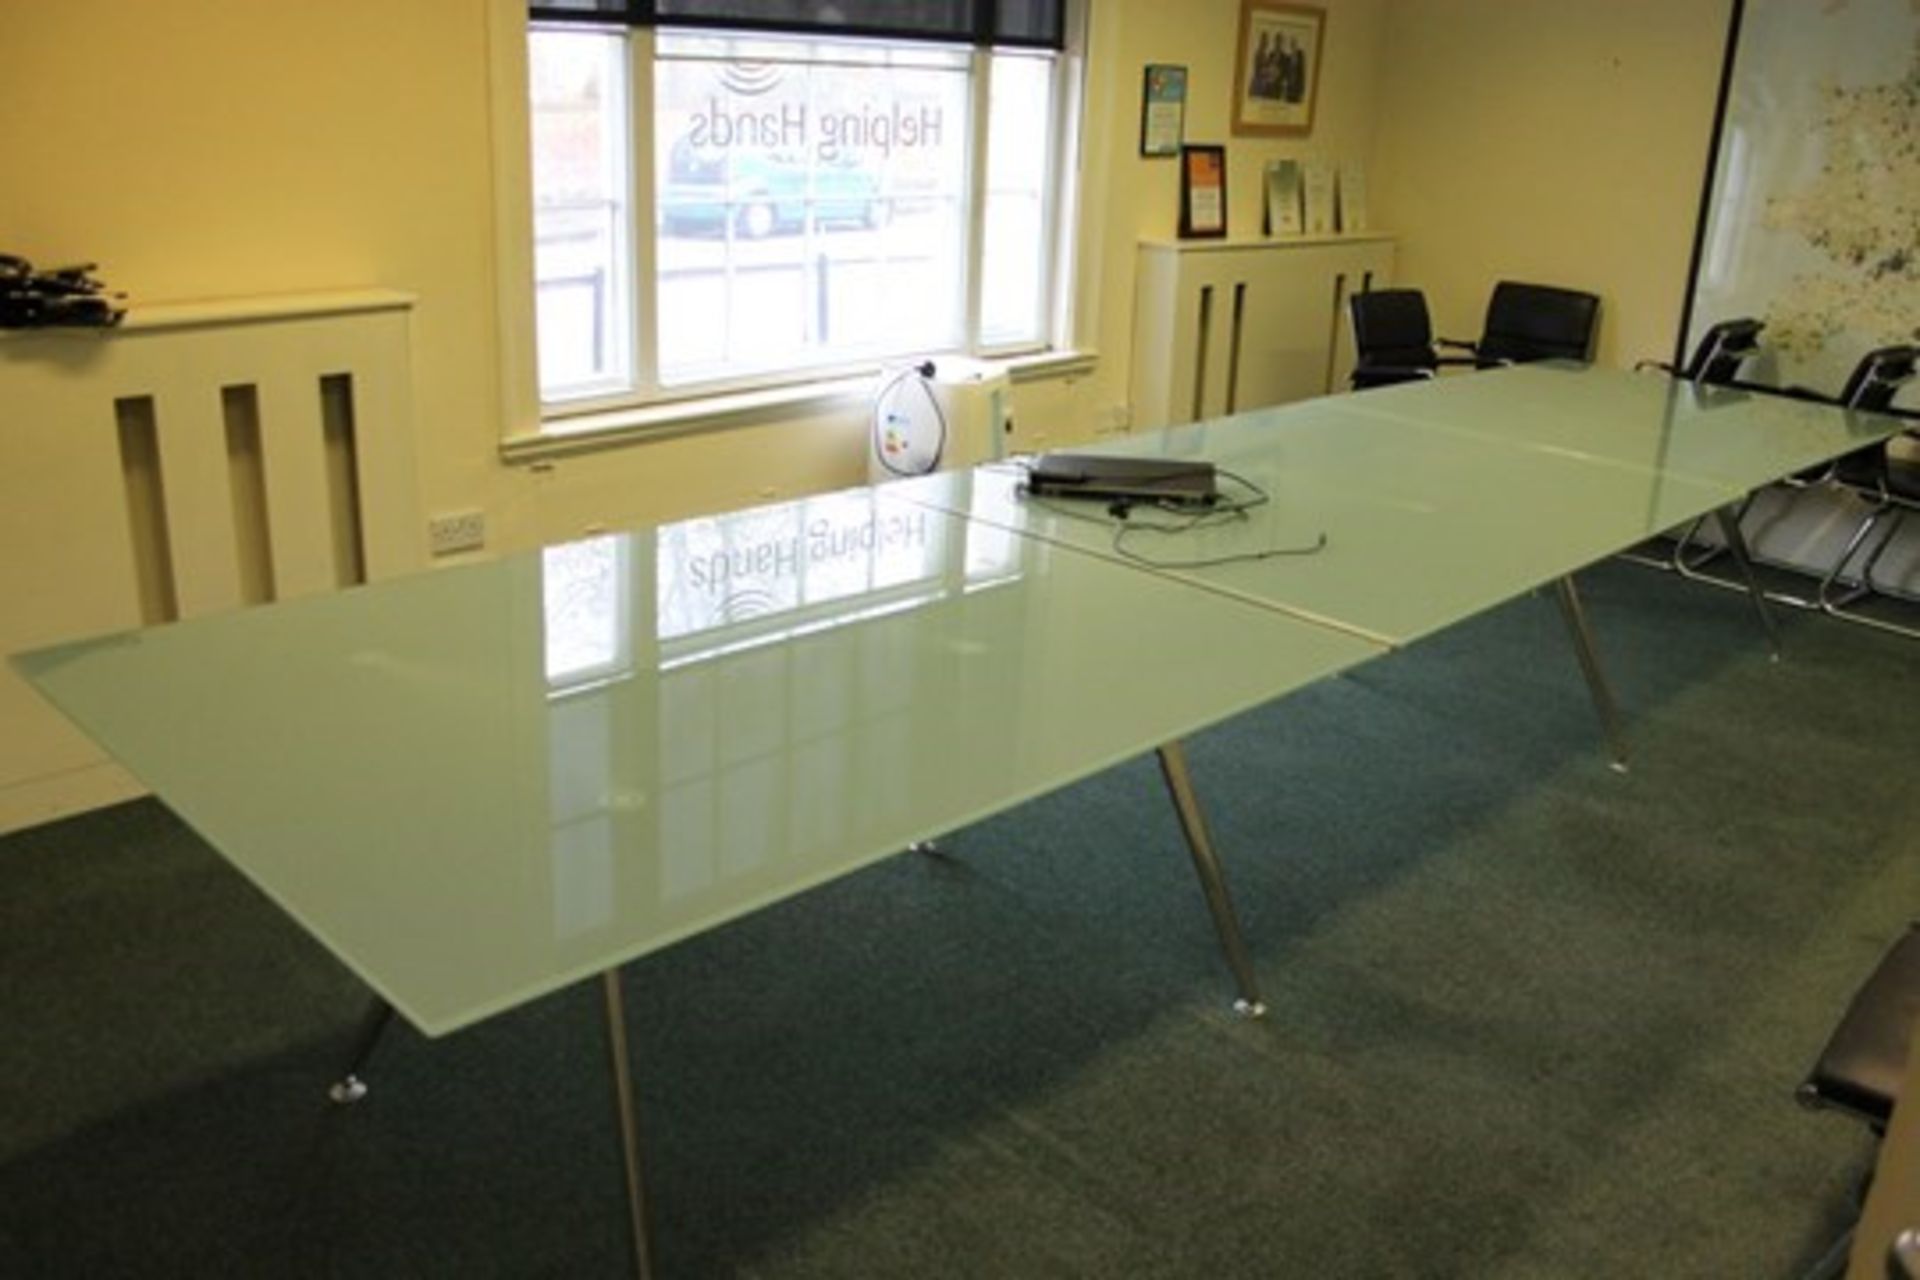 Italian made Huge Glass Board / Meeting Room Table - NO VAT Comes apart in 3 pieces – each glass